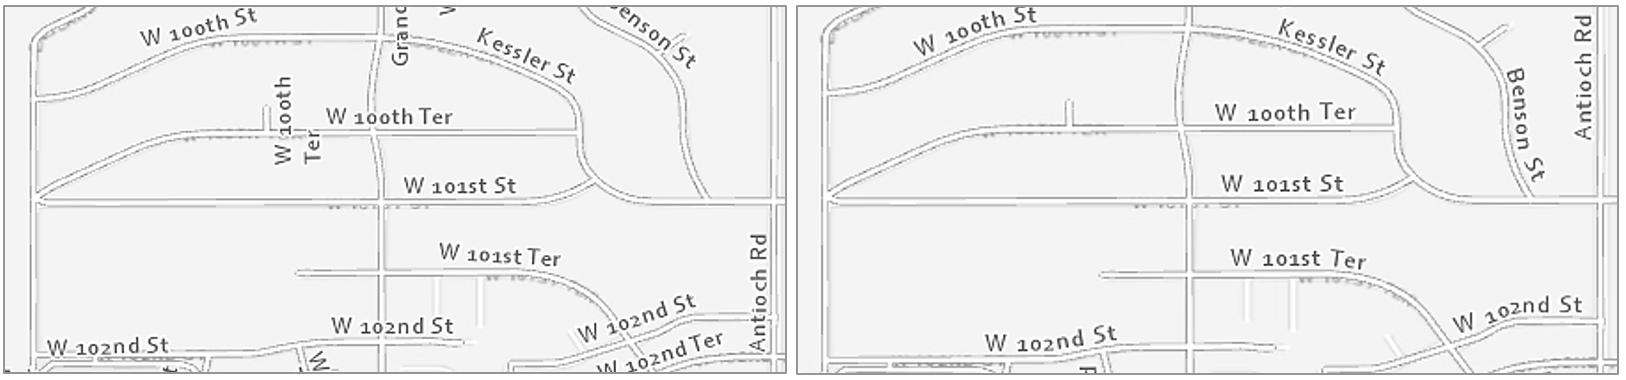 two map examples showing inferior and improved street label placements, see text above